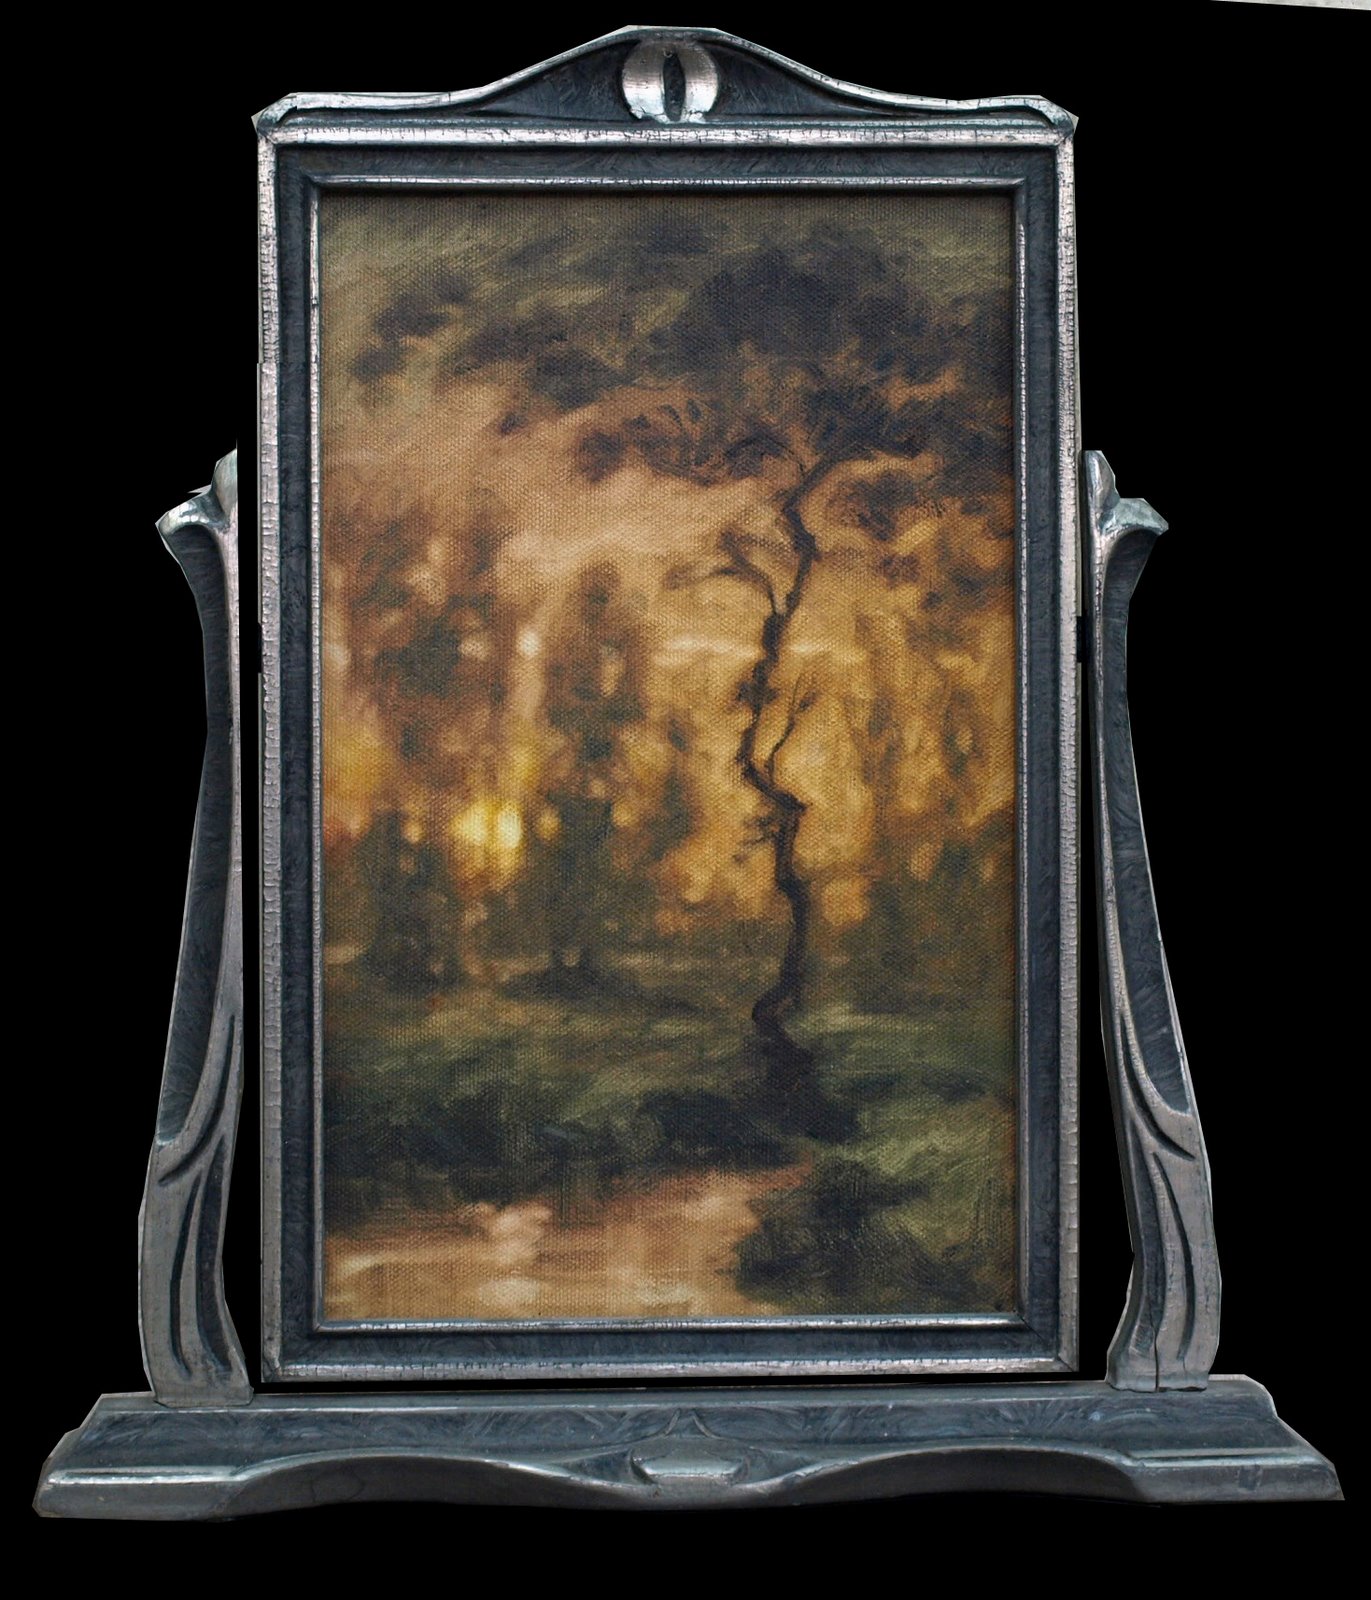 [2009-51-+Emerald+Valley-7x11+oils+on+panel+in+Antique+table+top+frame-by+Michael+Orwick.jpg]